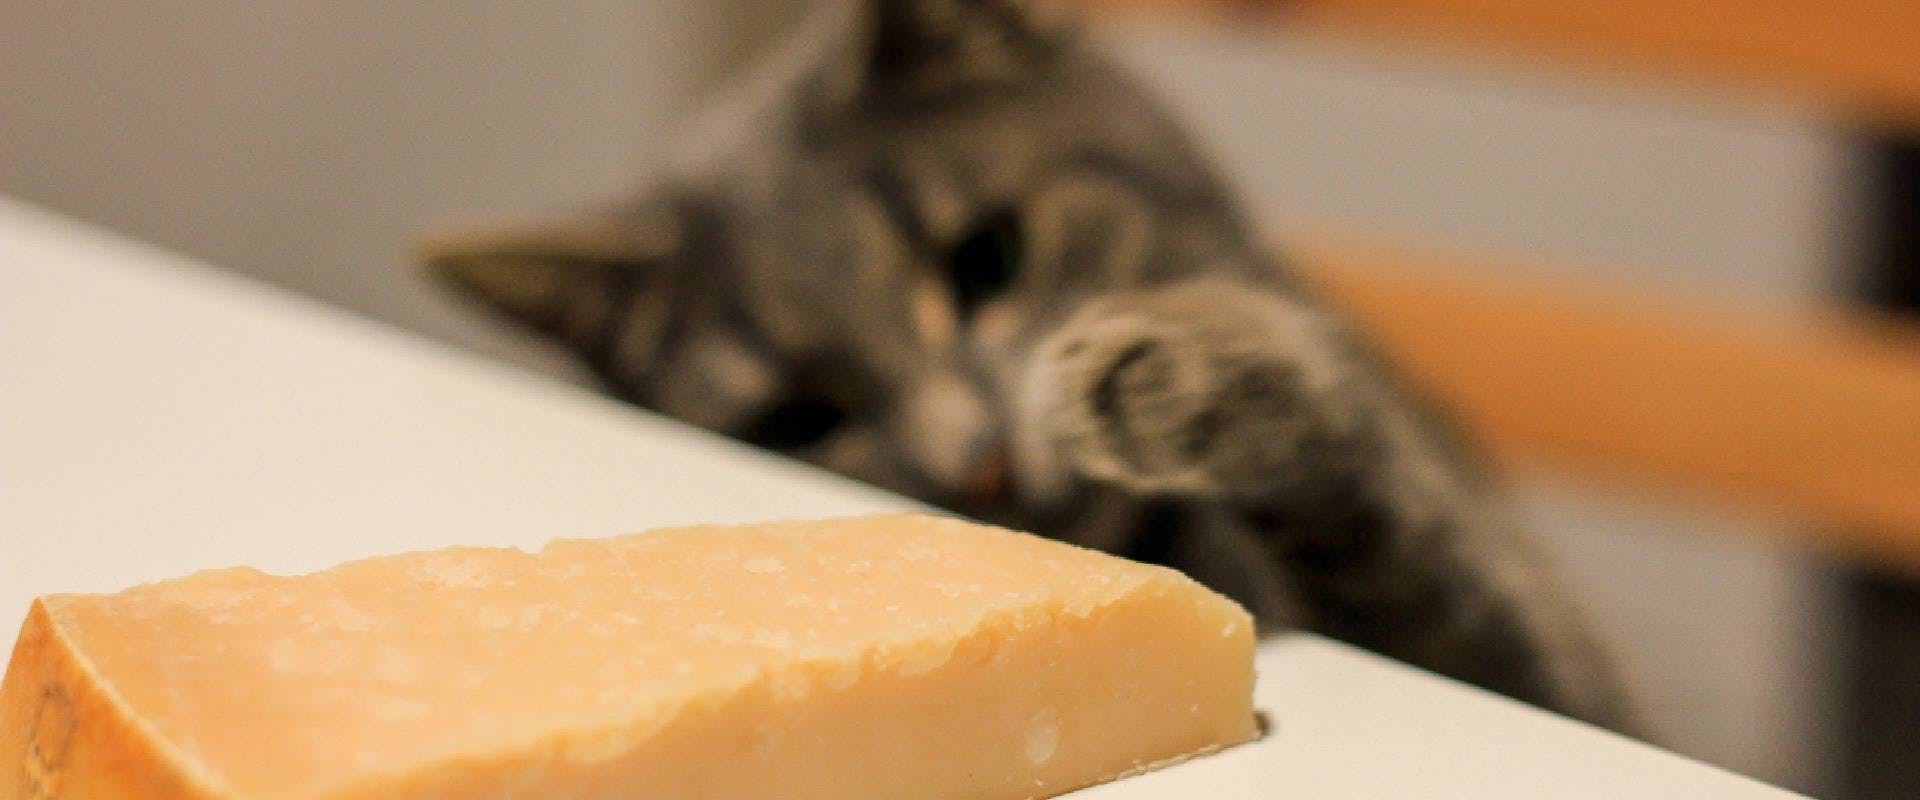 Cat reaching for cheese